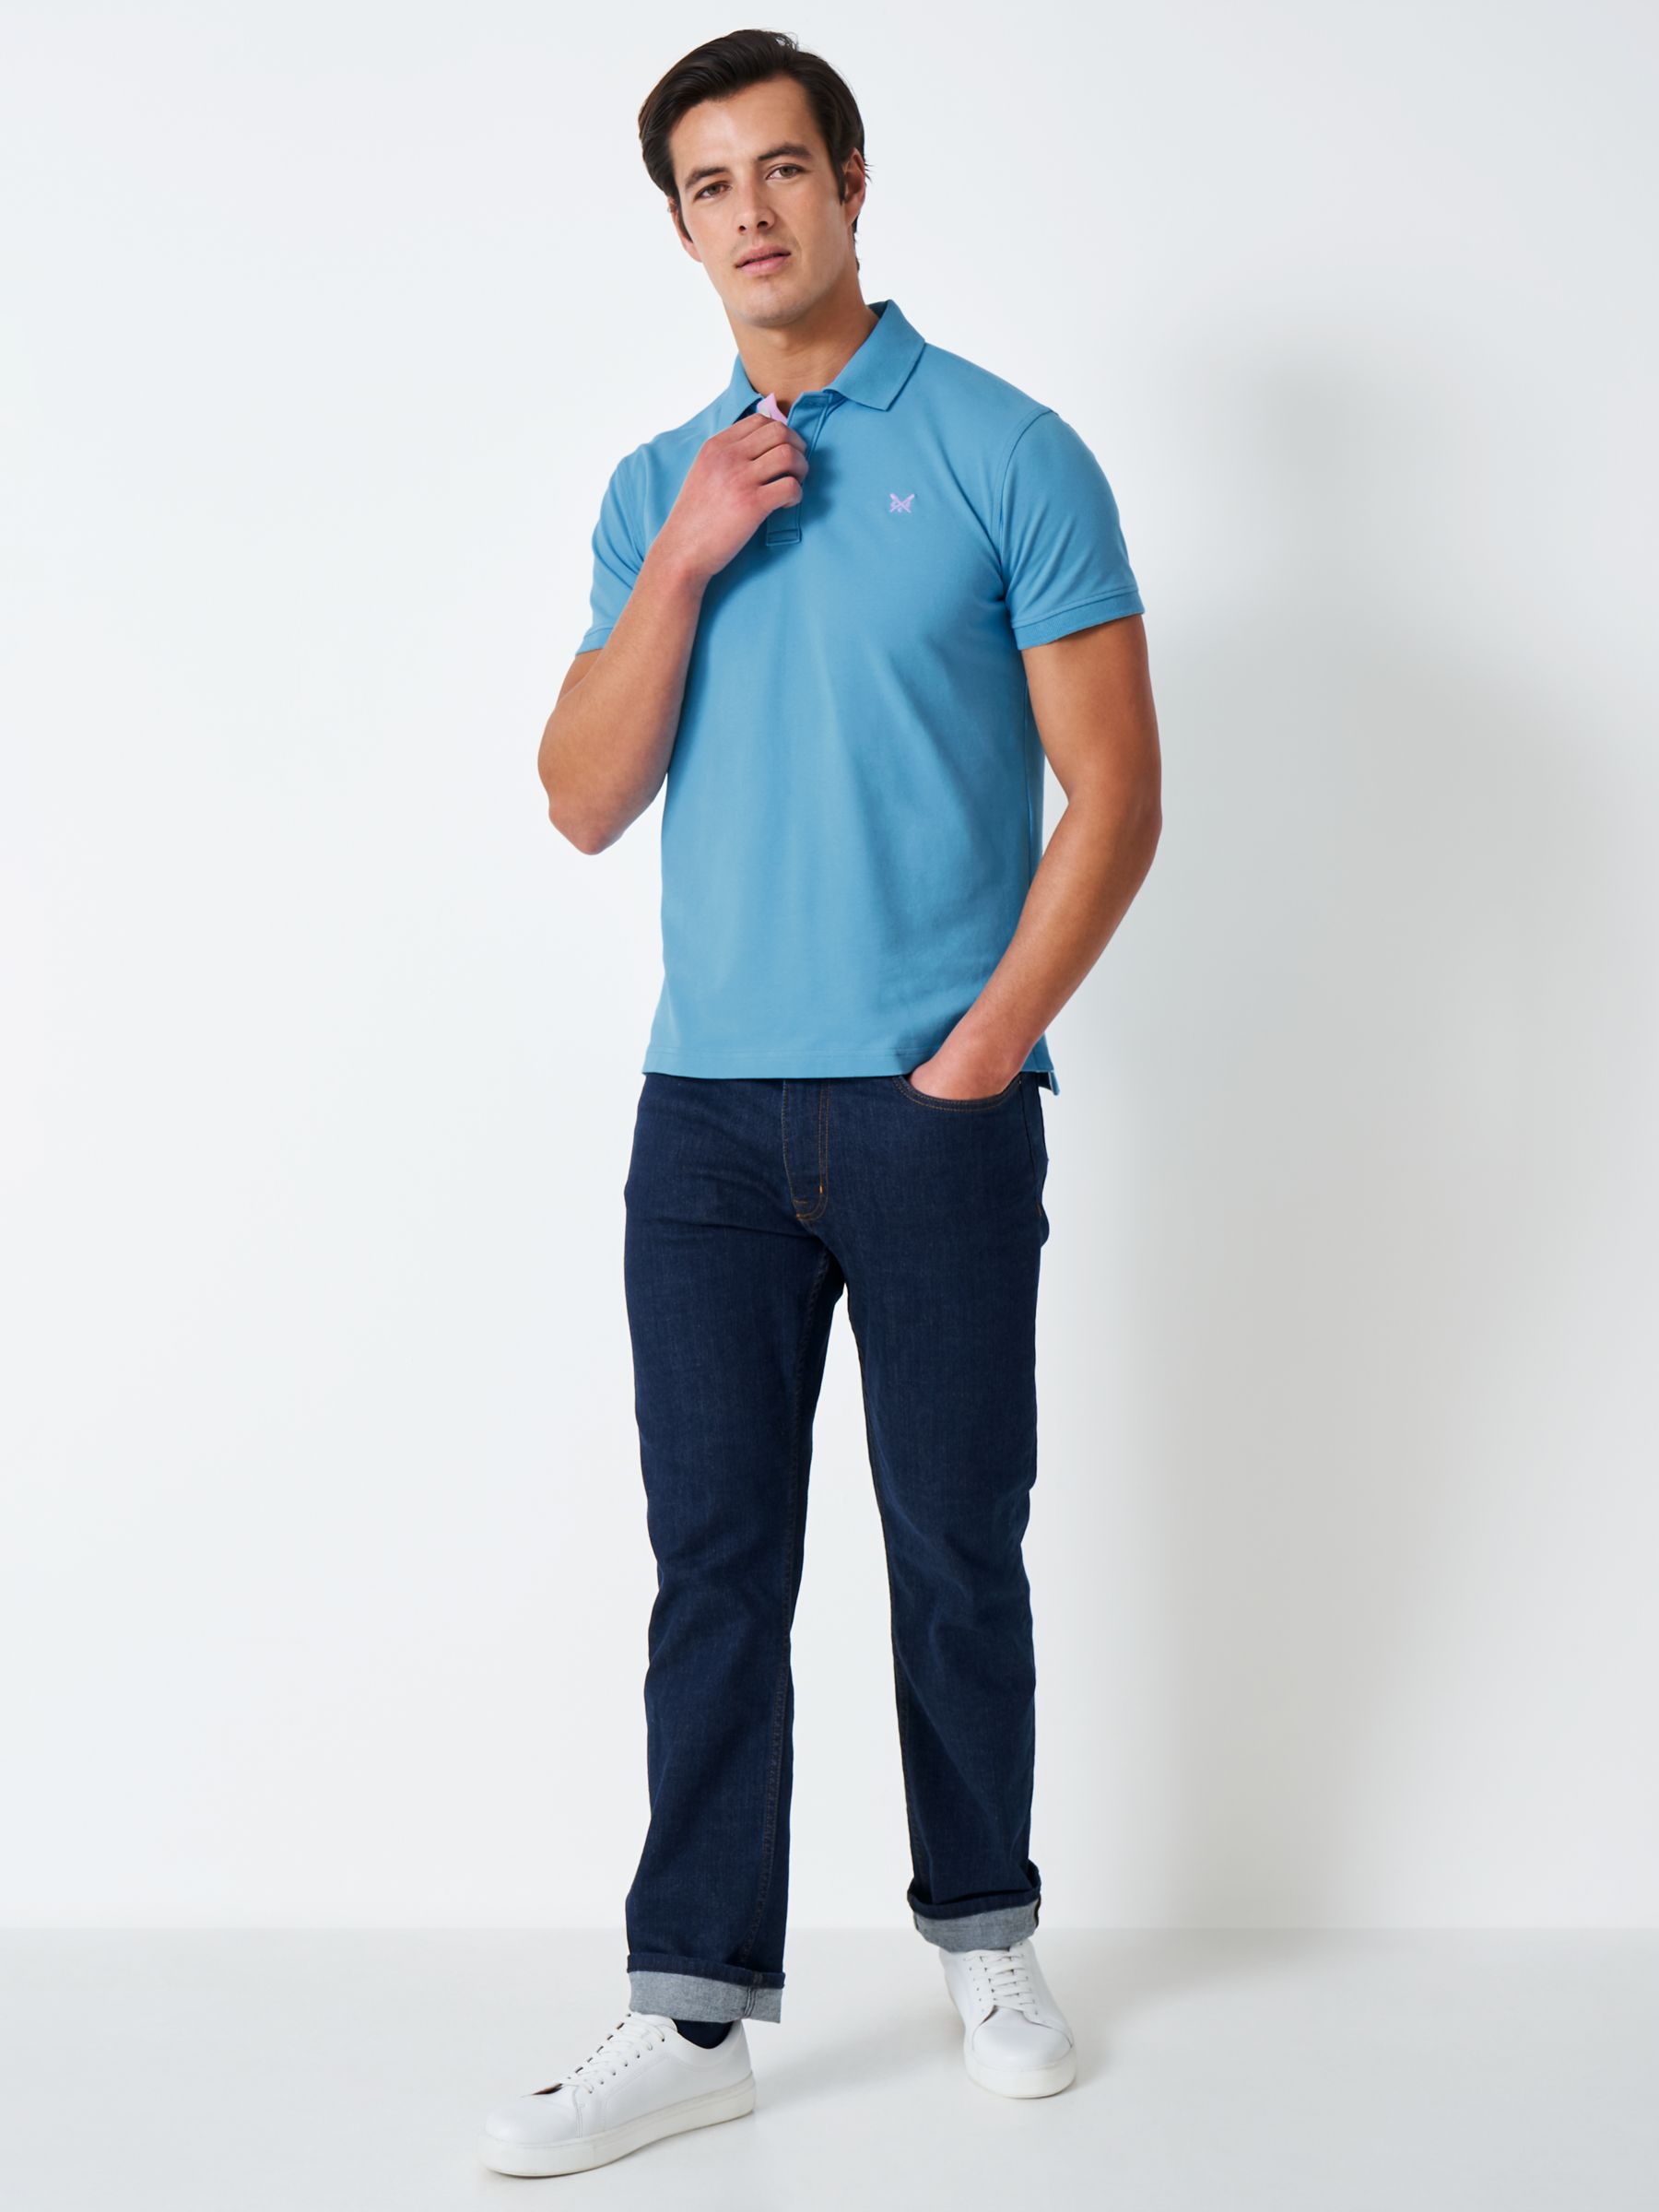 at Short Blue Sleeve Piqué Partners Crew & Clothing Polo John Lewis Top, Bright